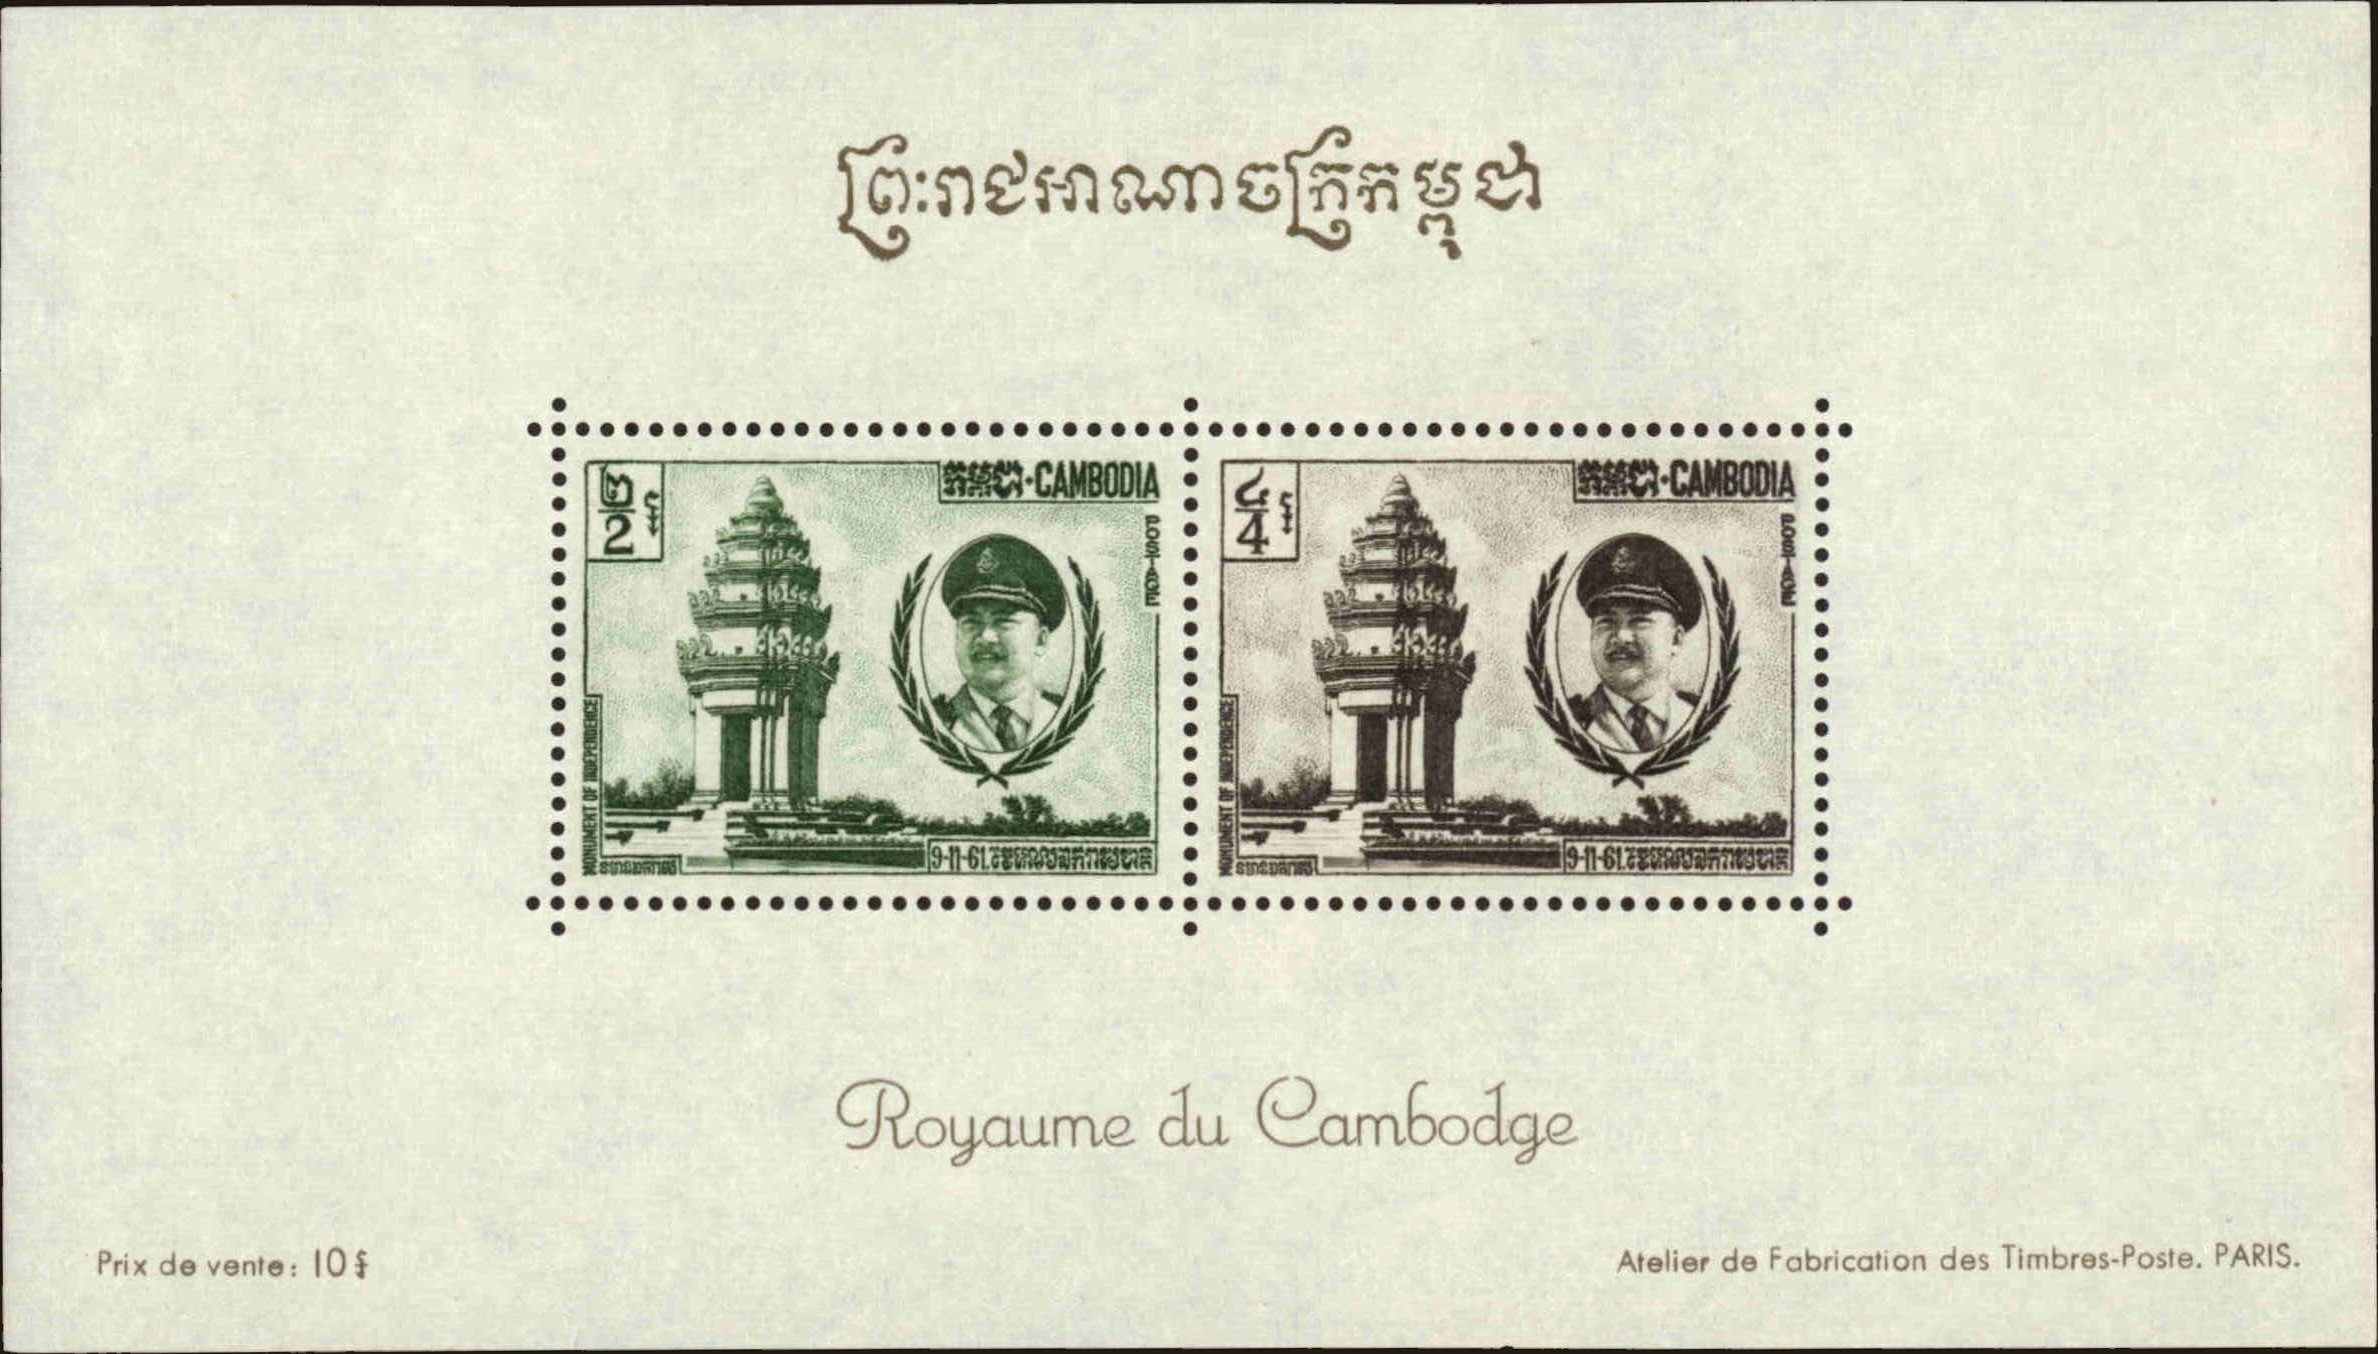 Front view of Cambodia 98a collectors stamp